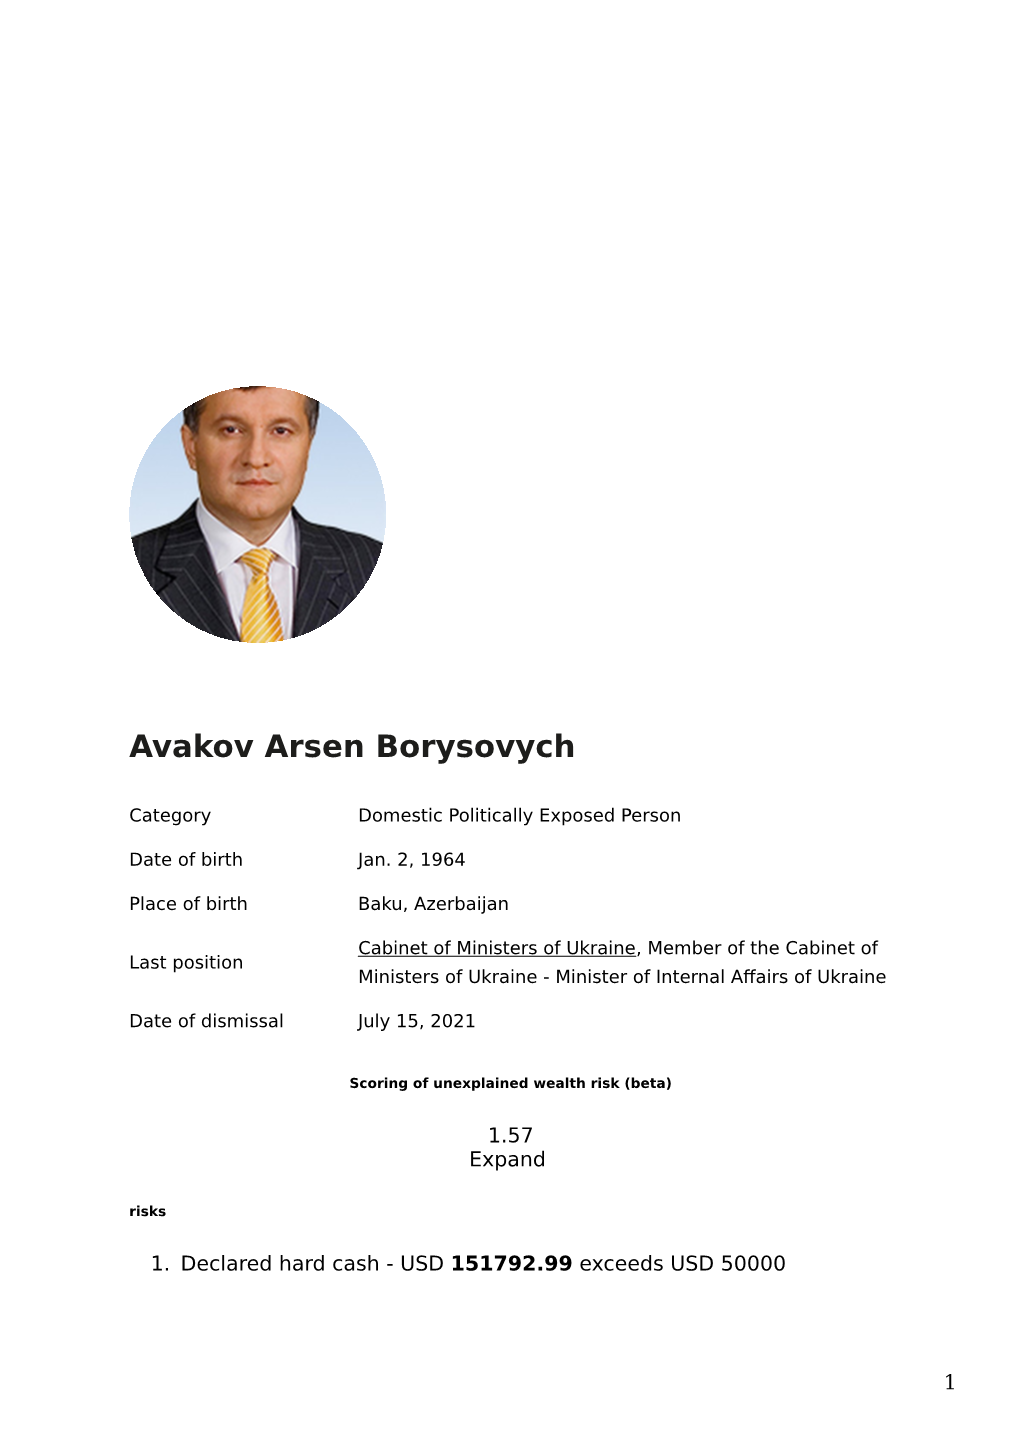 Dossier Avakov Arsen Borysovych, Cabinet of Ministers of Ukraine